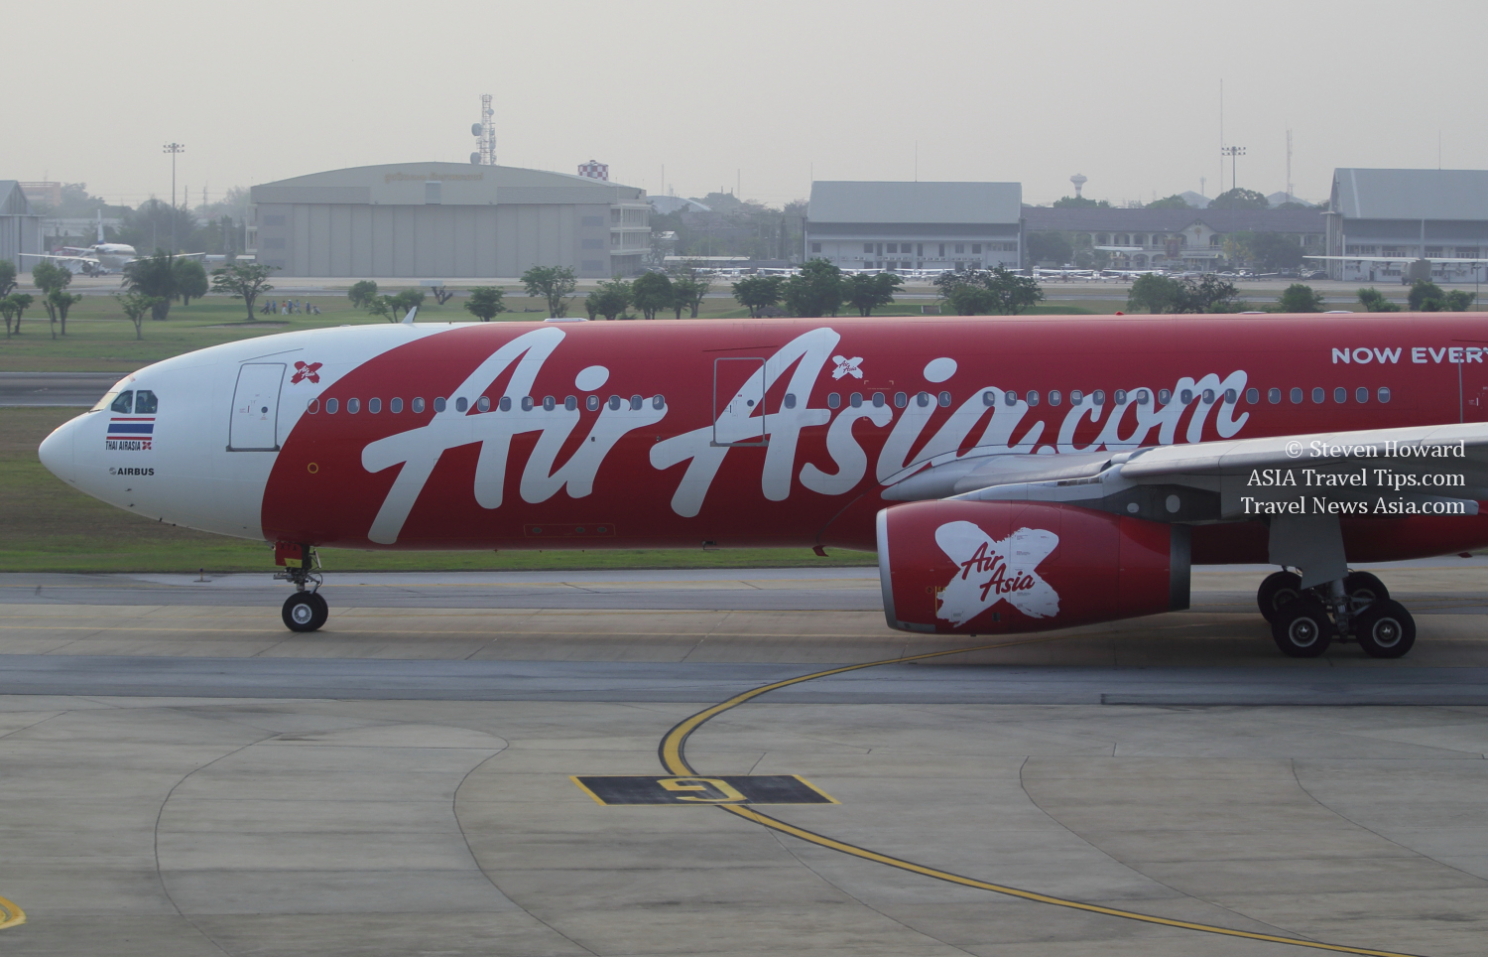 Thai AirAsia X A330 at DMK. Picture by Steven Howard of TravelNewsAsia.com Click to enlarge.